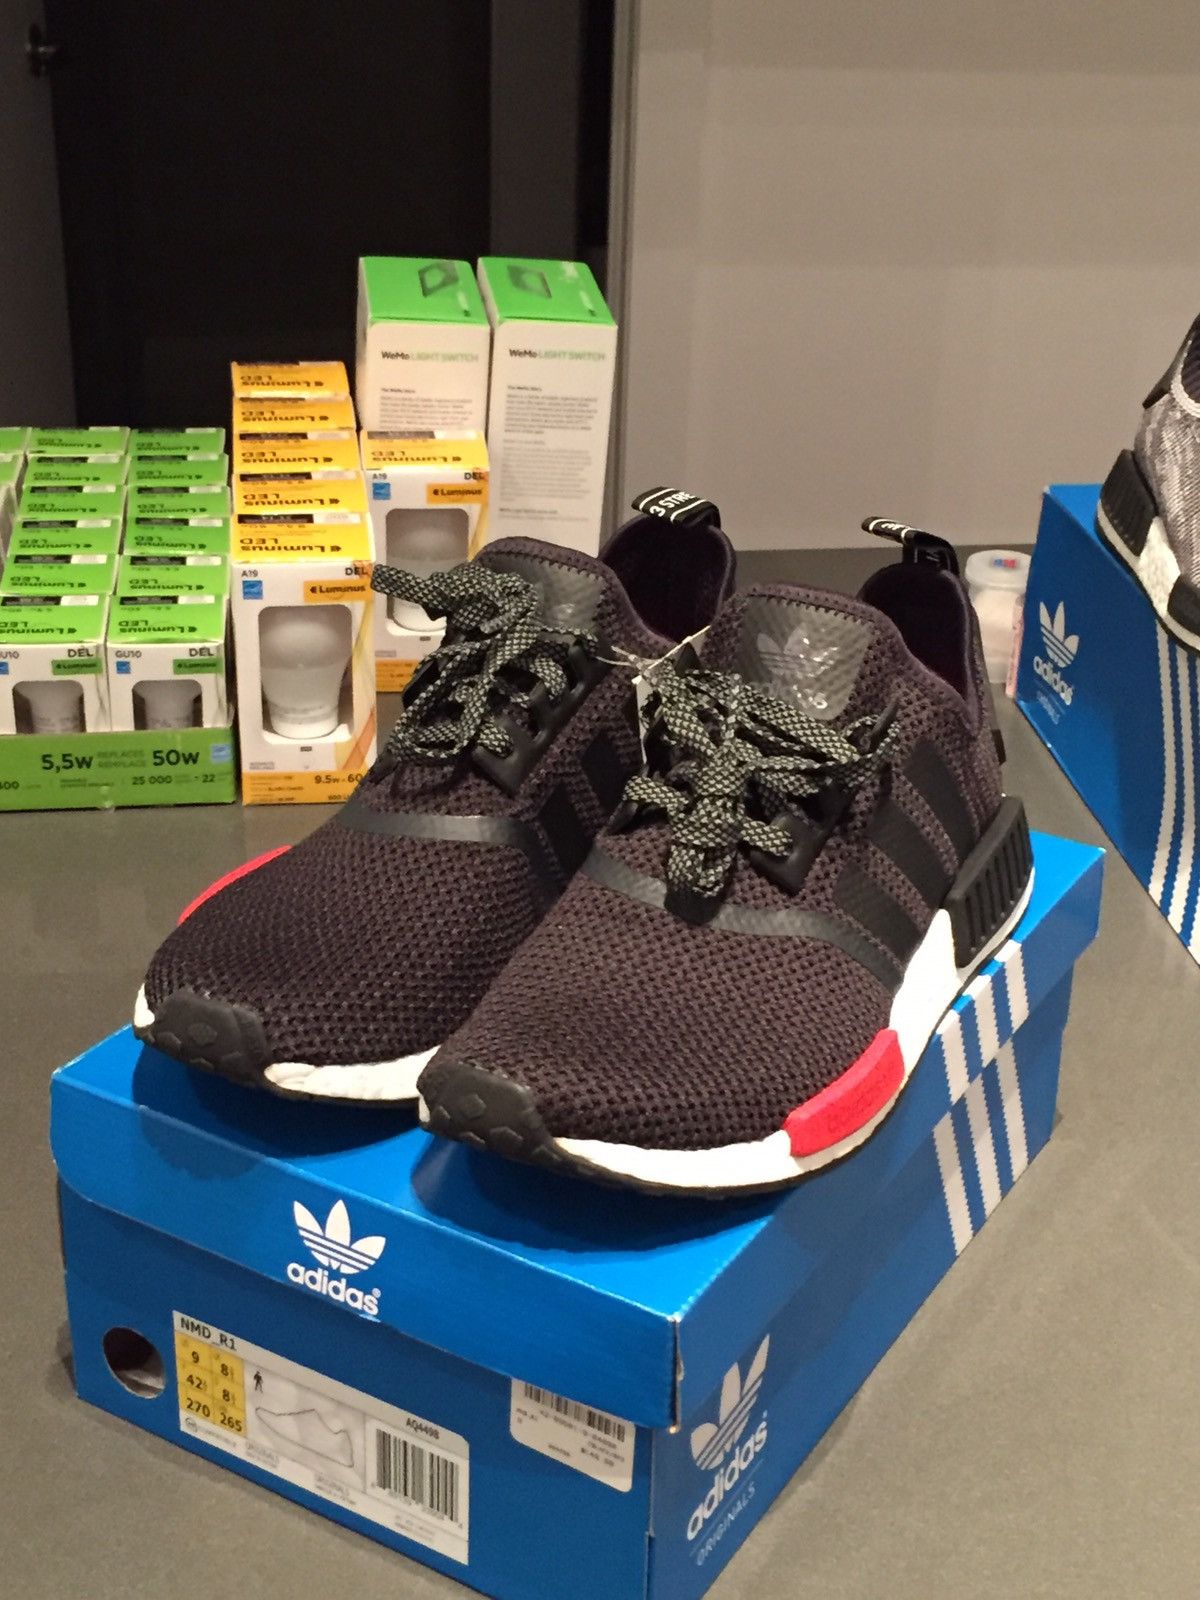 Adidas NMD "Footlocker Exclusive" Size US 9 / EU 42 - 1 Preview